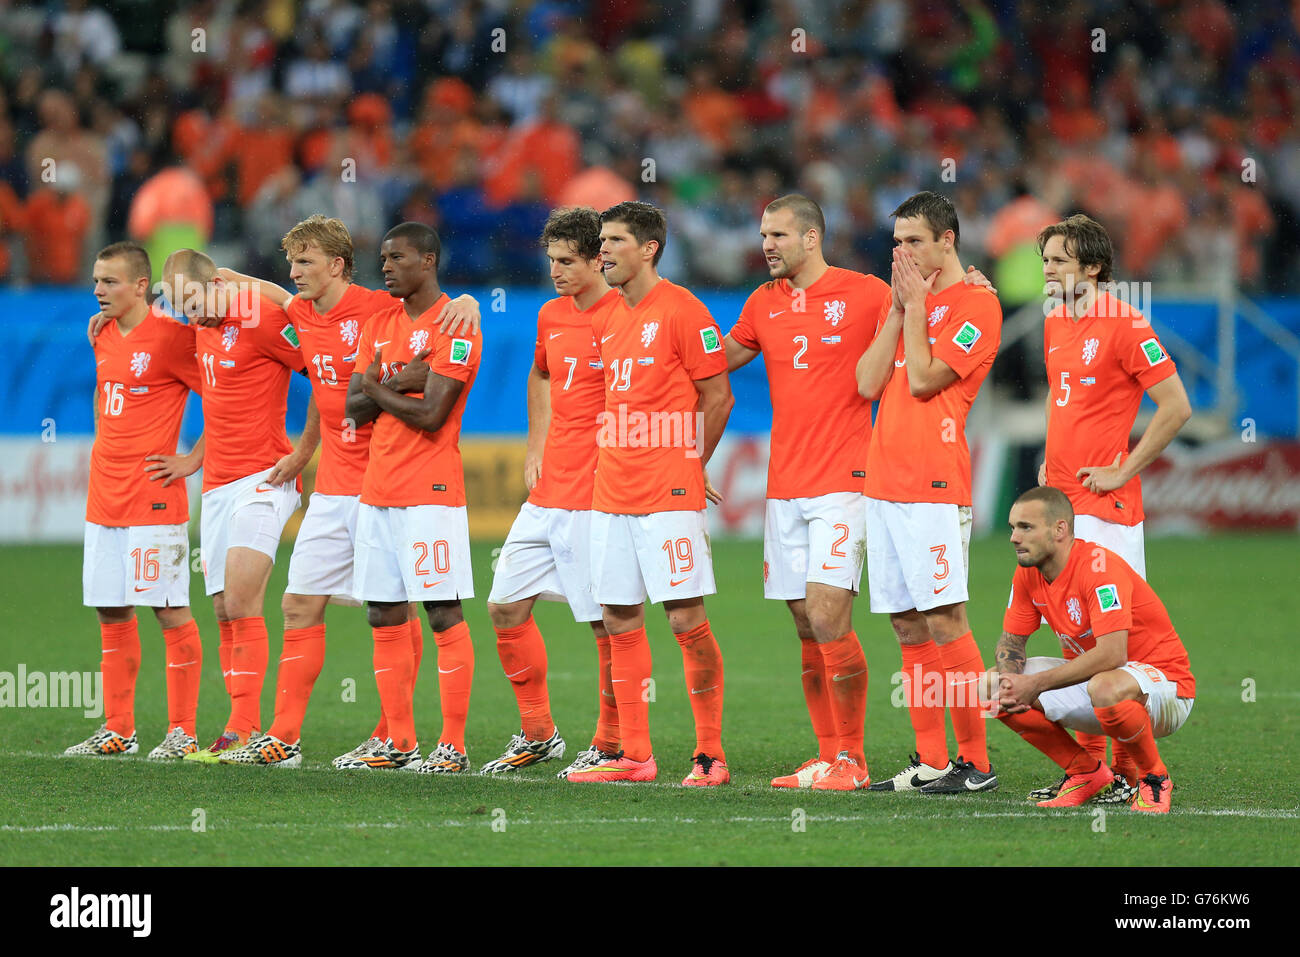 Netherlands players appear dejected in the penalty shoot-out during the FIFA World Cup Semi Final at the Arena de Sao Paulo, Sao Paulo, Brazil. PRESS ASSOCIATION Photo. Picture date: Wednesday July 9, 2014. See PA story SOCCER Holland. Photo credit should read: Mike Egerton/PA Wire. RESTRICTIONS: No commercial use. No use with any unofficial 3rd party logos. No manipulation of images. No video emulation Stock Photo